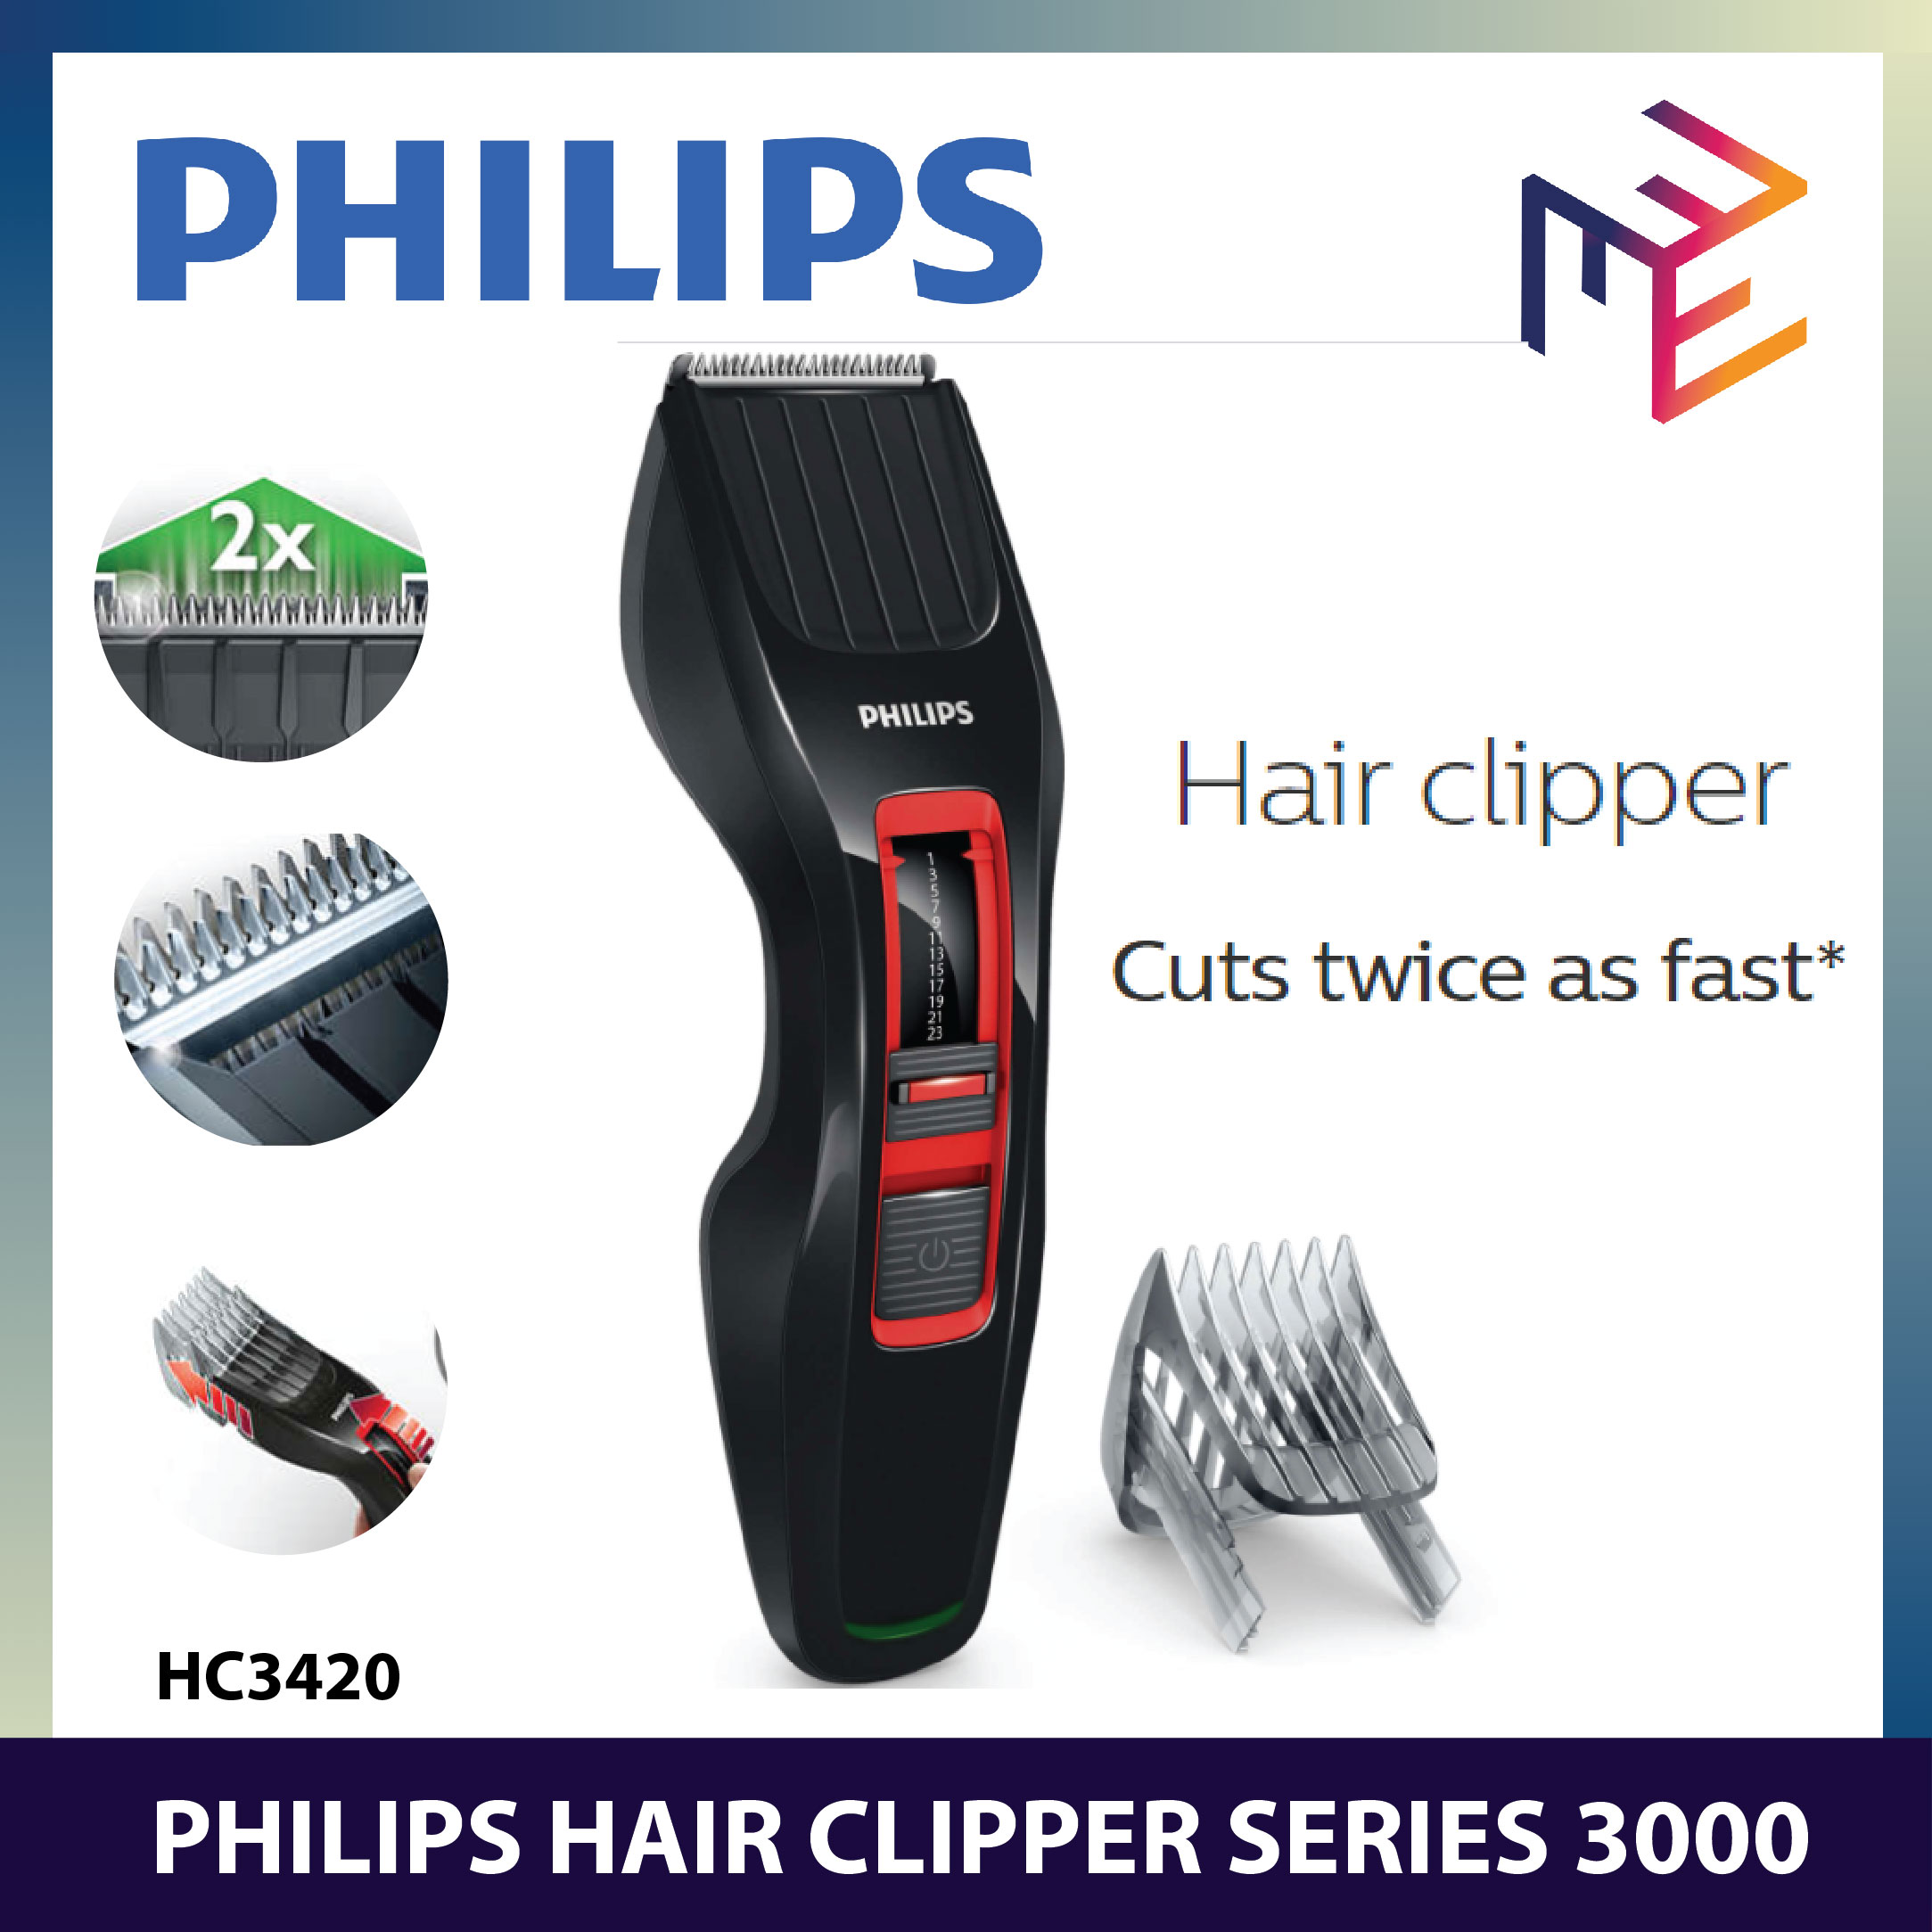 philips series 3000 trimmer blade